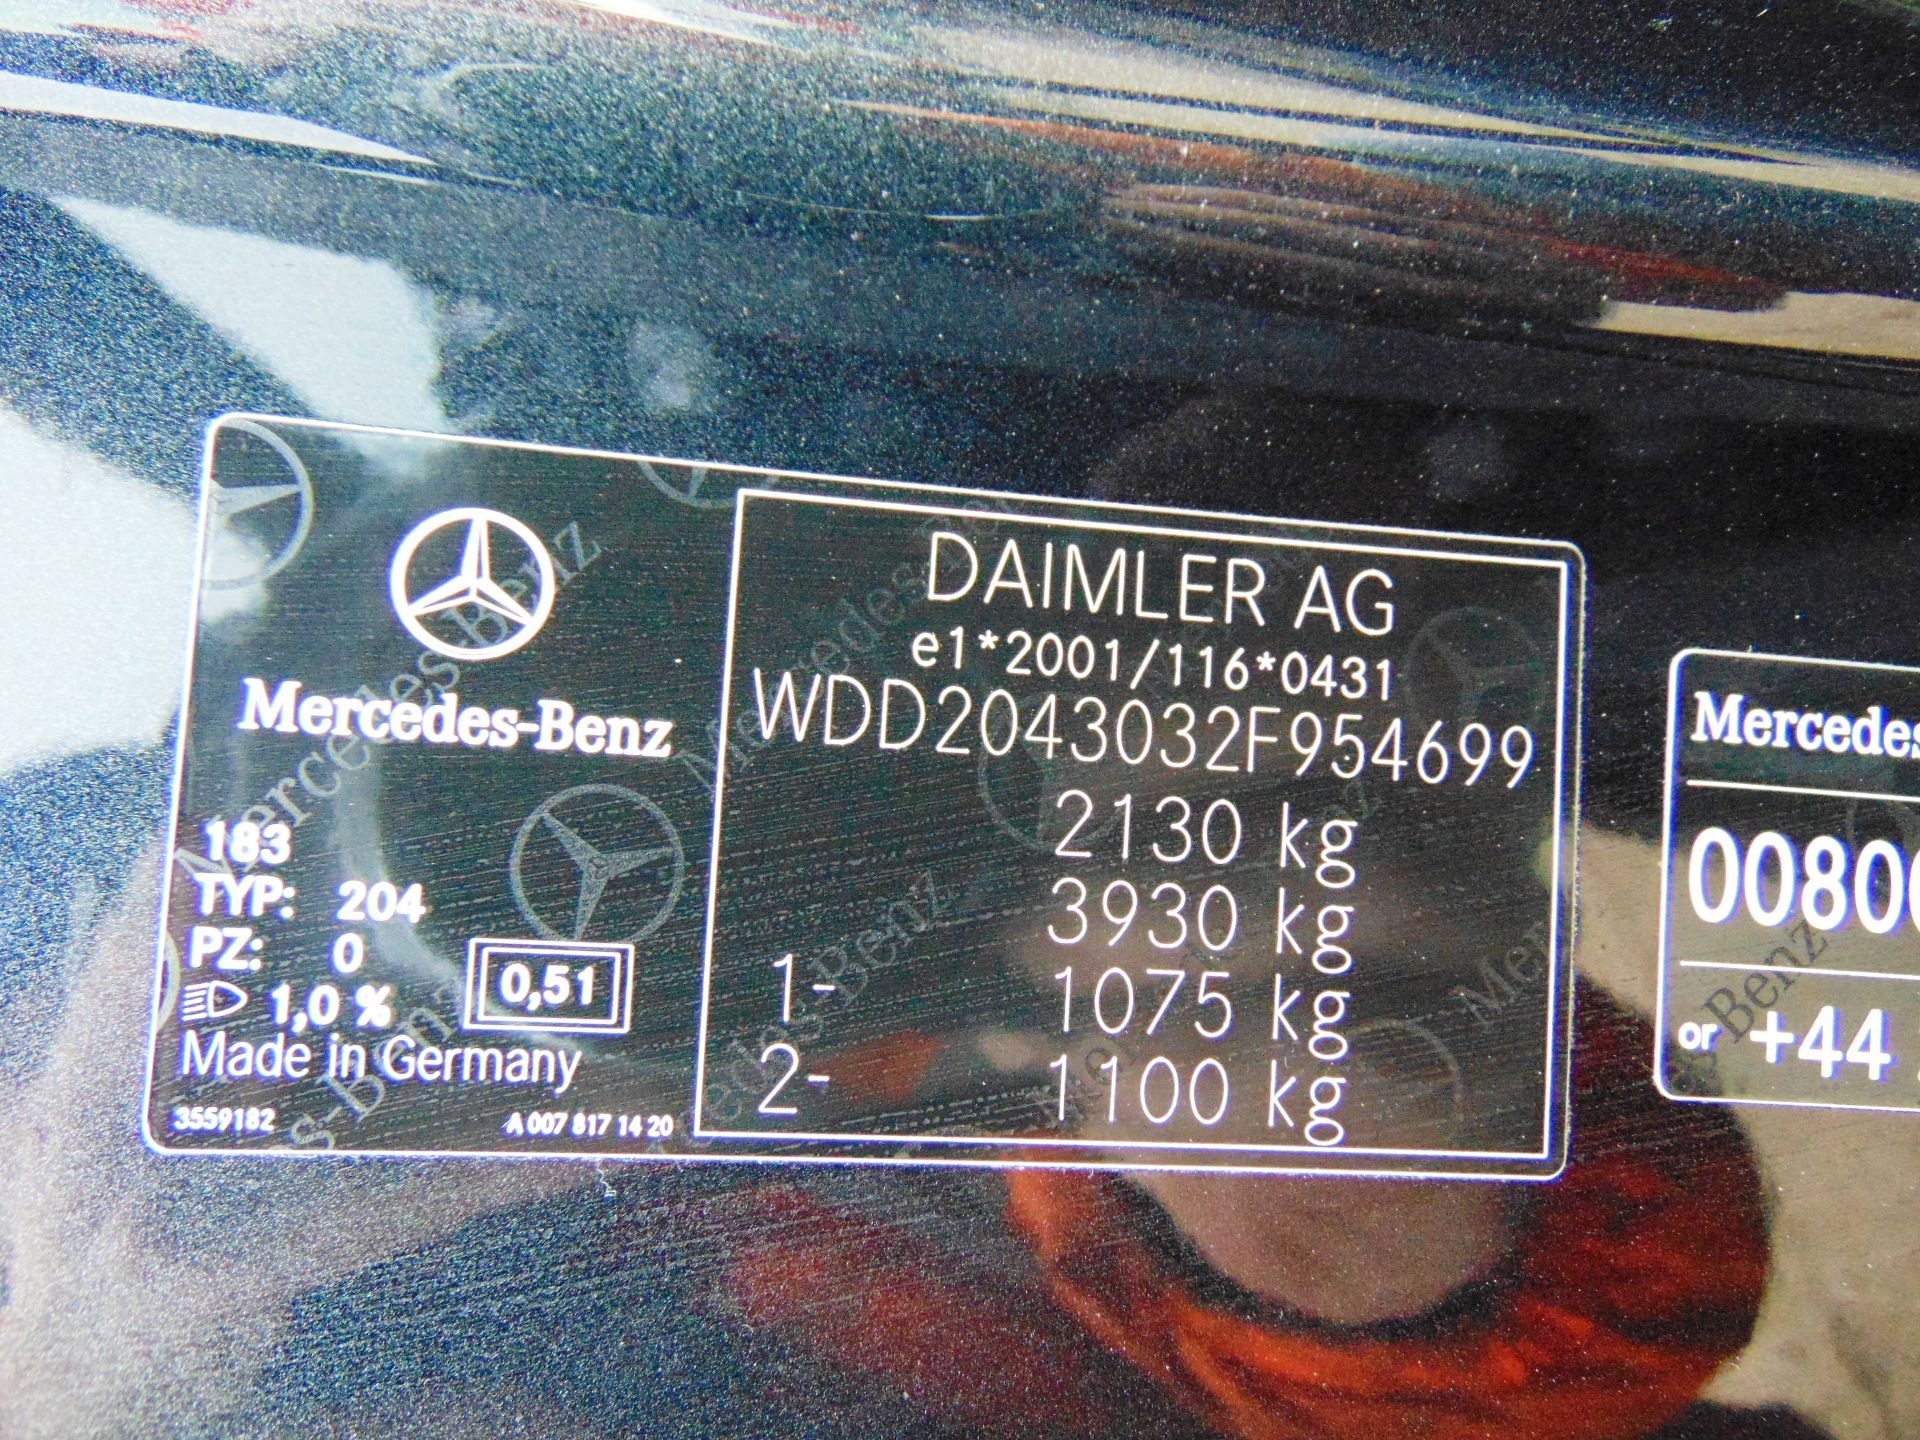 2012 Mercedes-Benz C Class 2.1 C250 CDI BlueEFFICIENCY AMG Sport 4dr Auto ONLY 7,860 miles!!! - Image 22 of 29